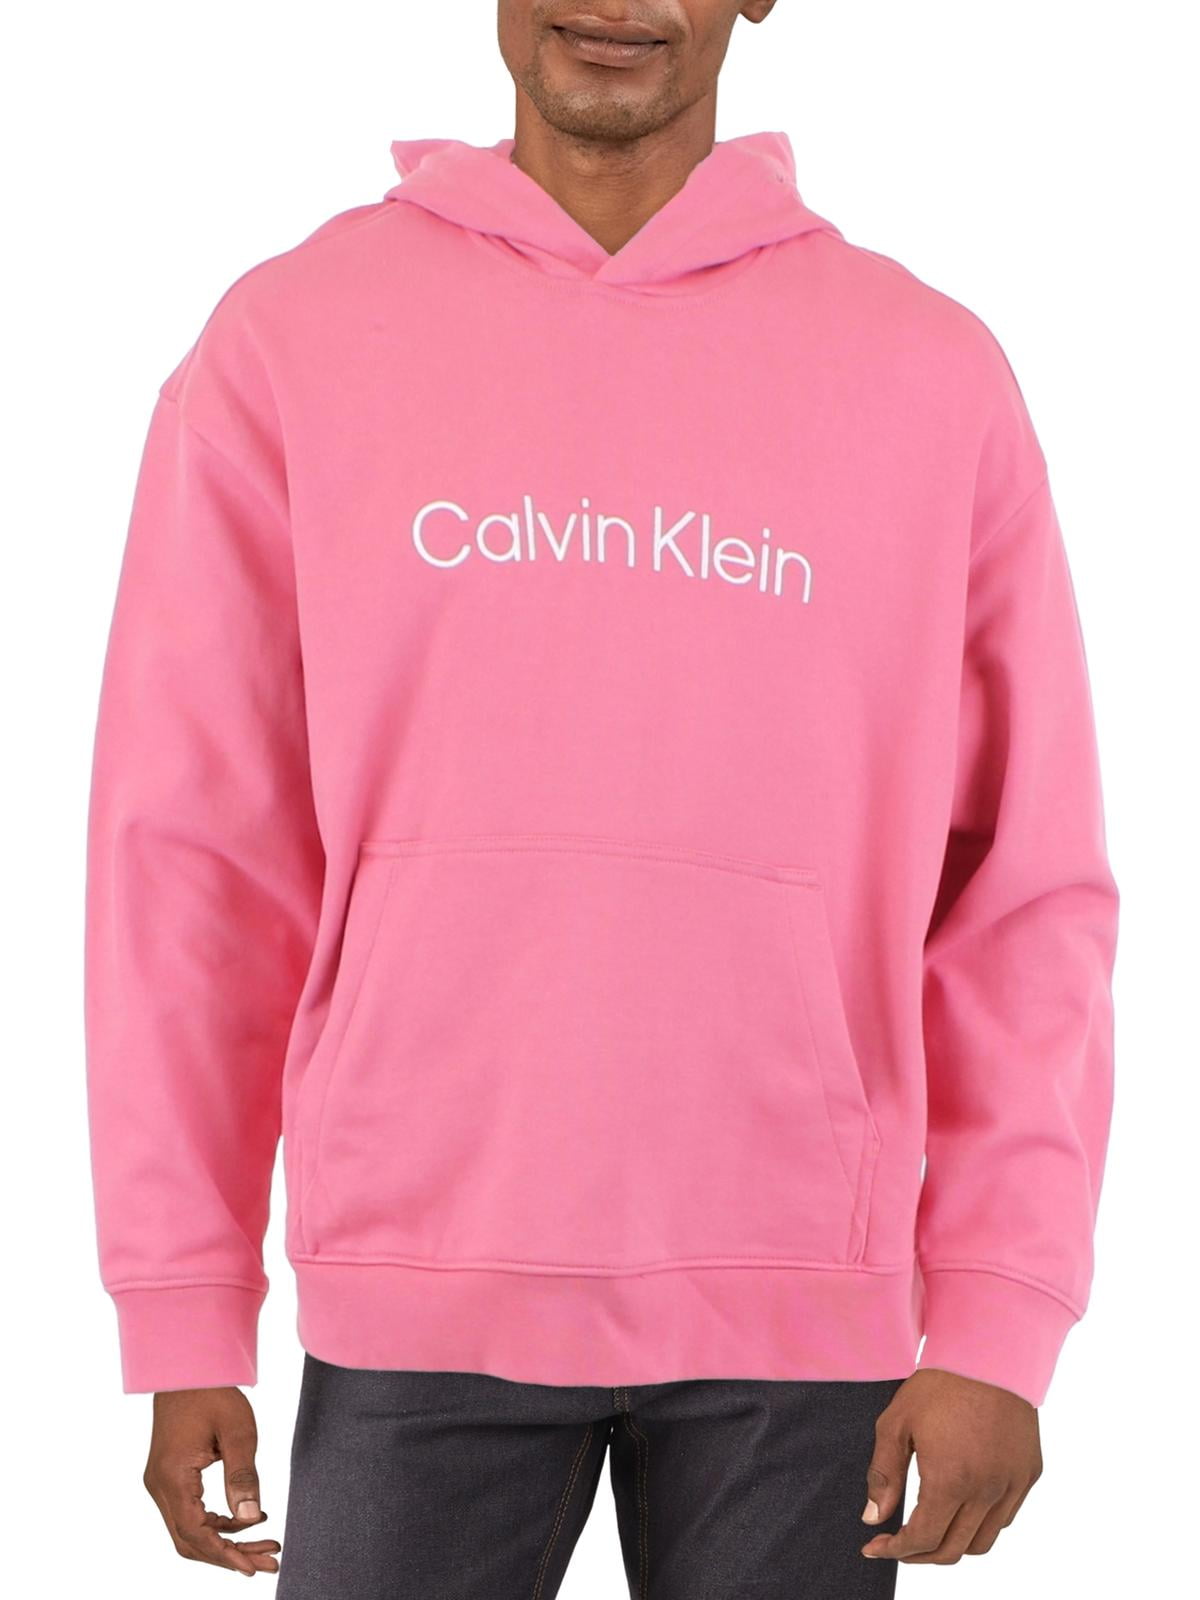 Calvin Klein Men\'s Relaxed Fit Logo French Terry Hoodie, Palace Blue, 2XL